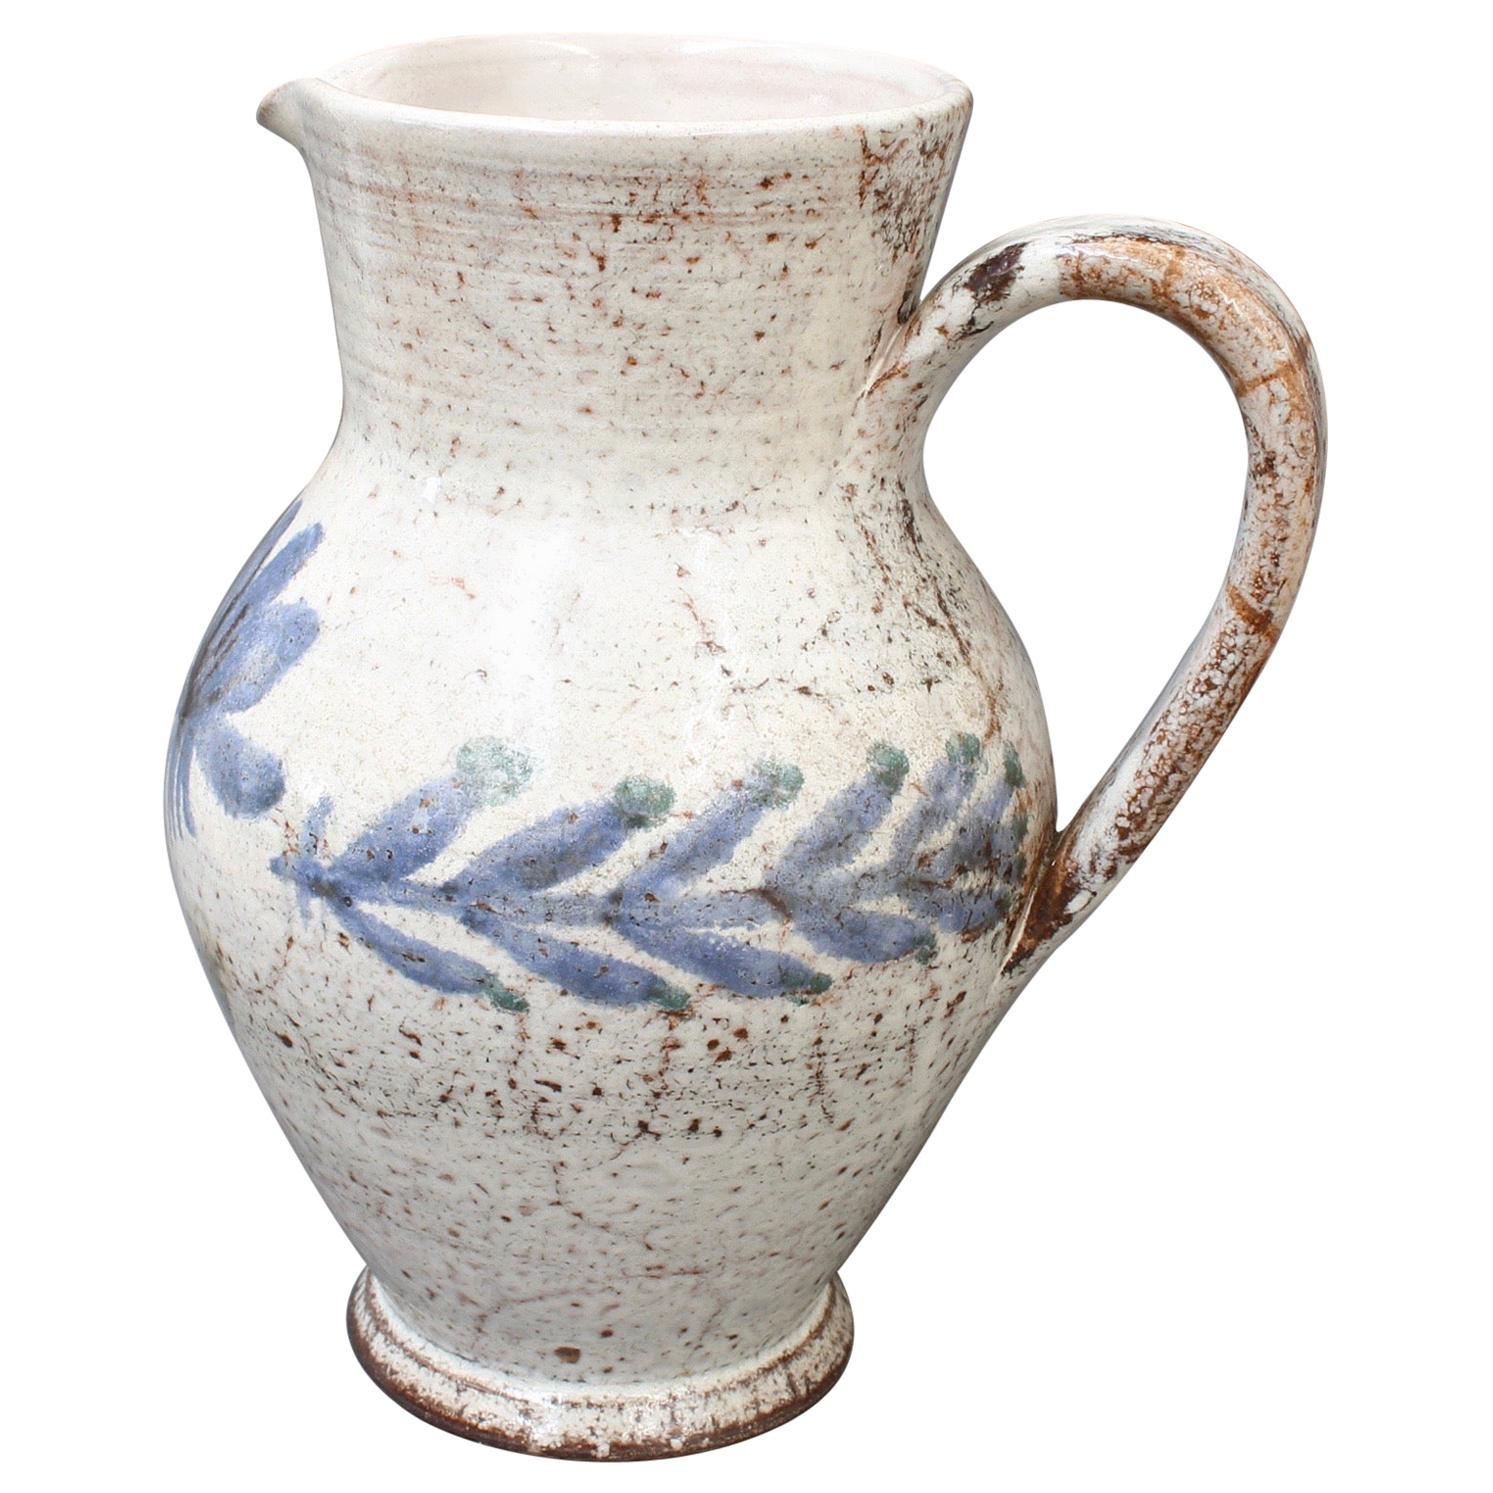 Vintage French Ceramic Pitcher by Gustave Reynaud, Le Mûrier, circa 1950s